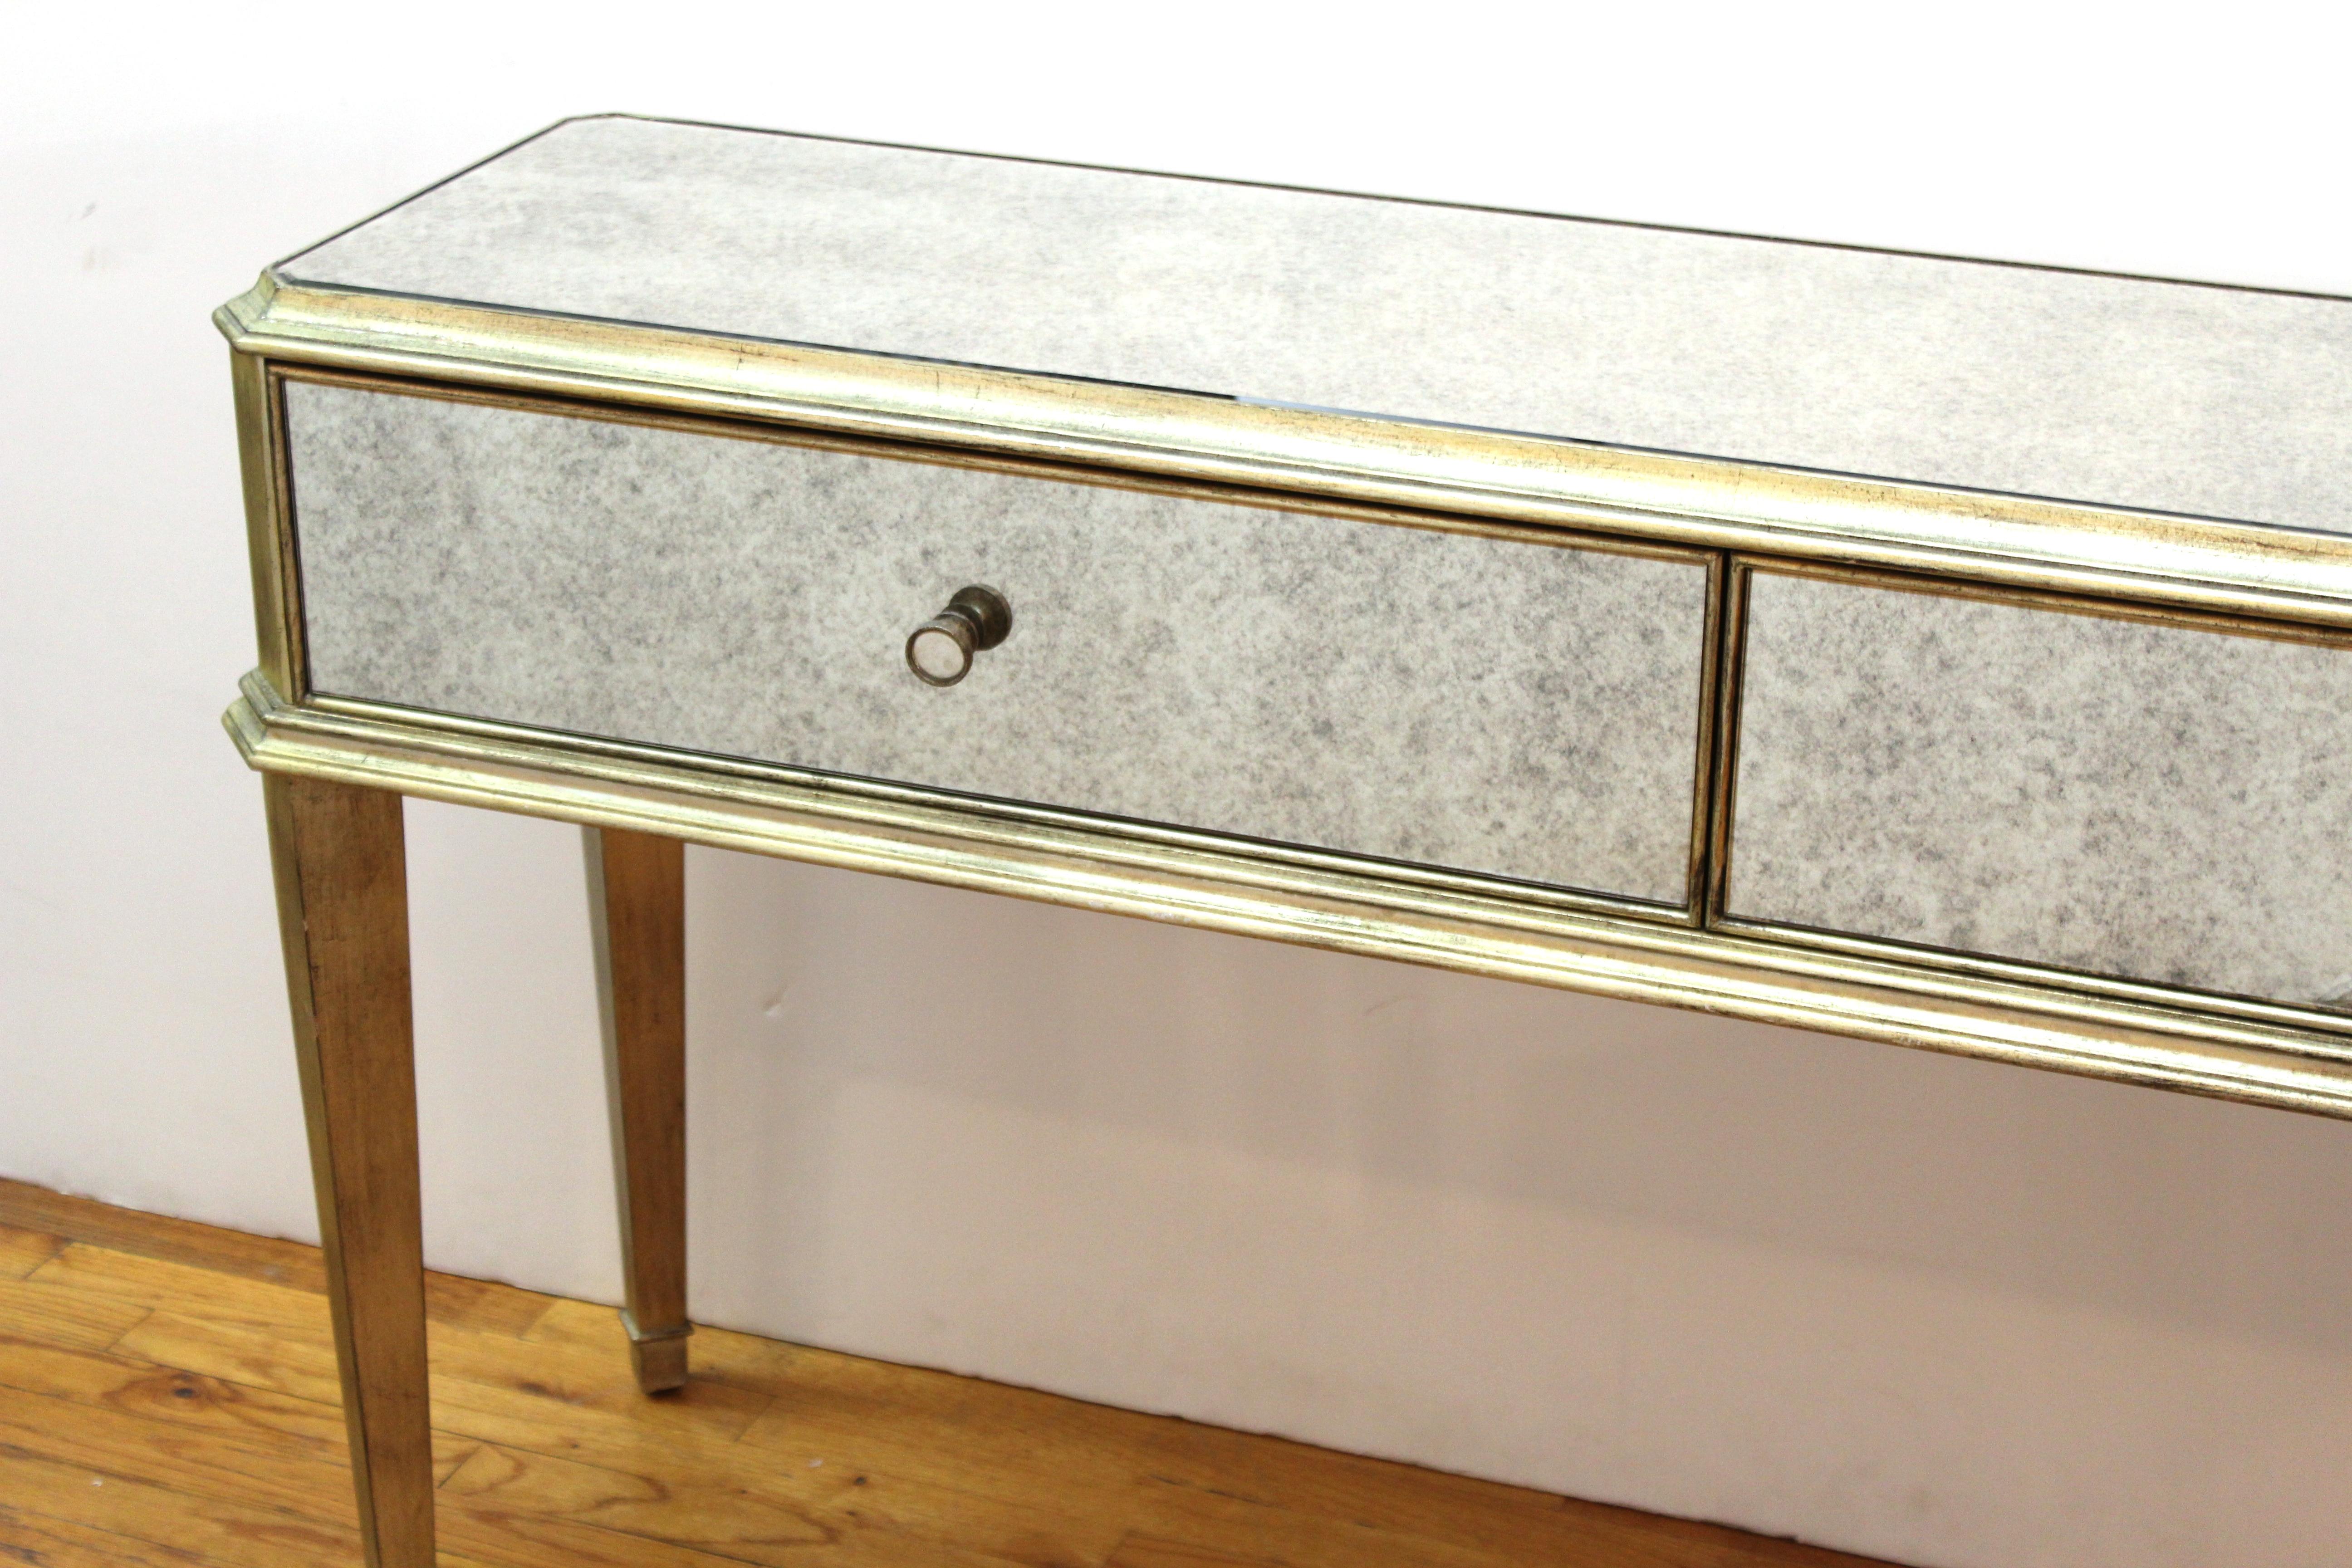 Modern Hollywood Regency console with drawers. The piece has mirrored surfaces and two drawers. In great vintage condition with age-appropriate wear and use.